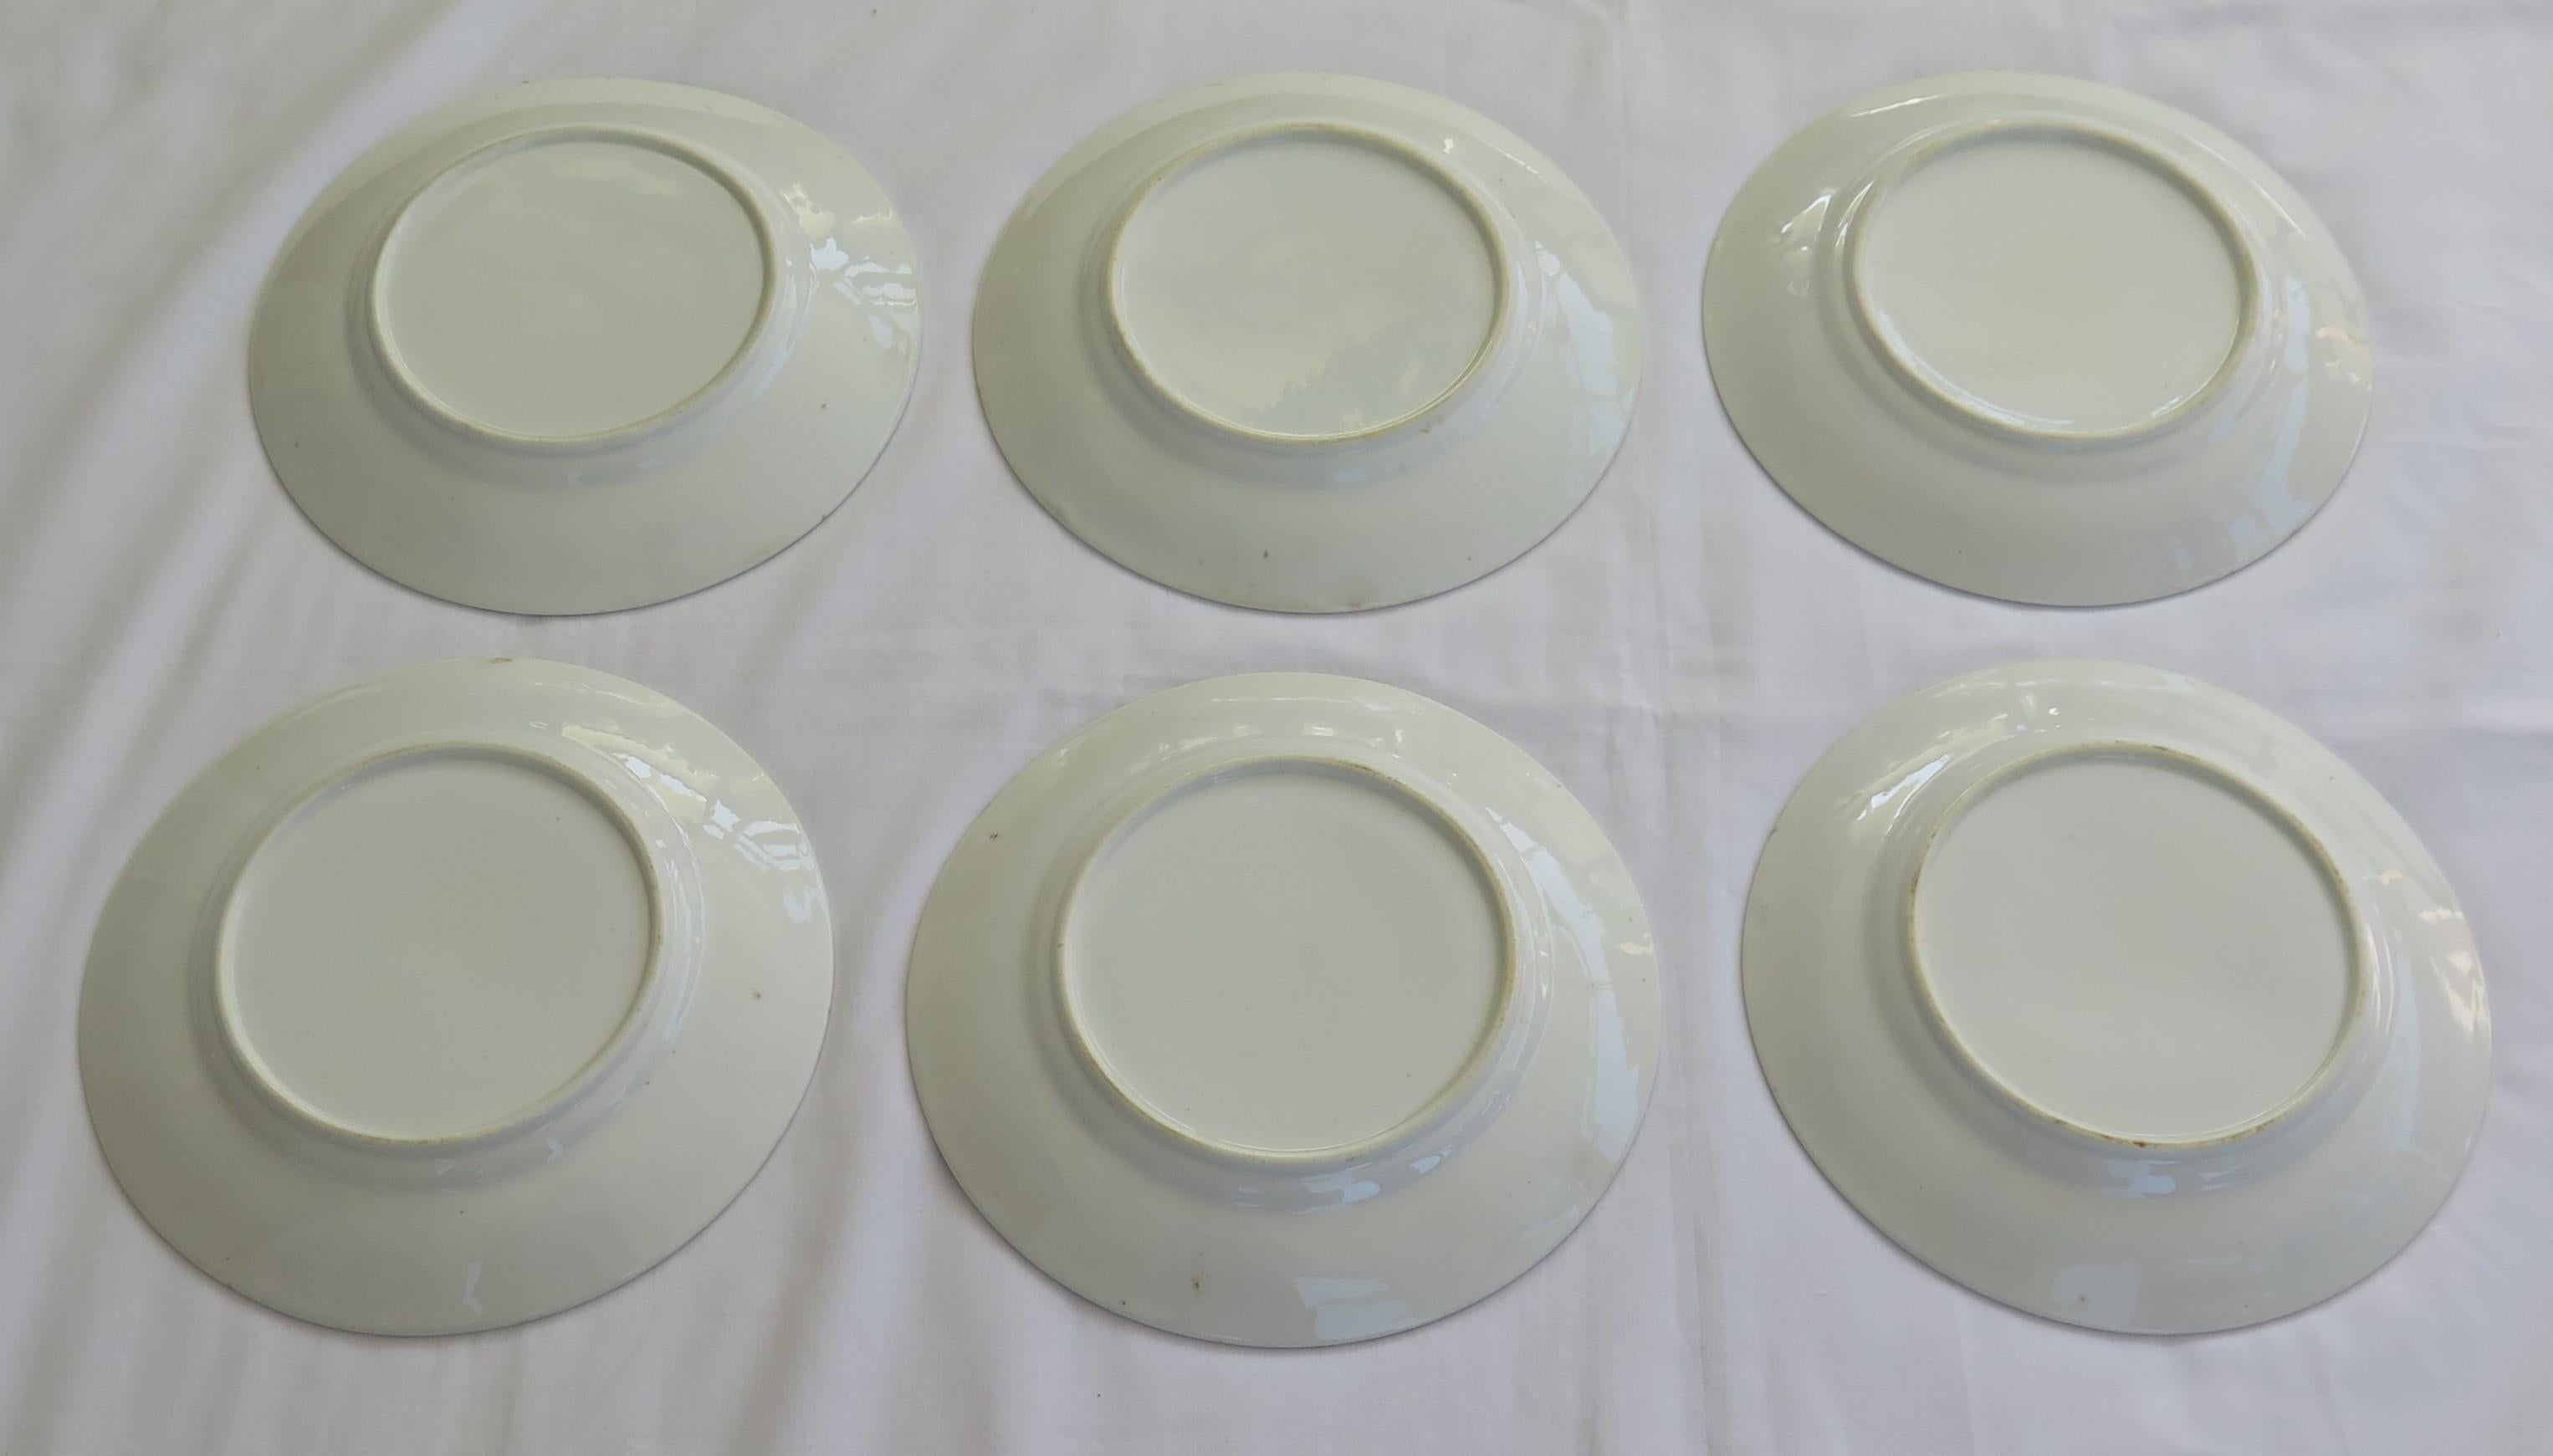 SIX Davenport Porcelain Plates Hand Painted and Gilded Pattern, Circa 1870 For Sale 12